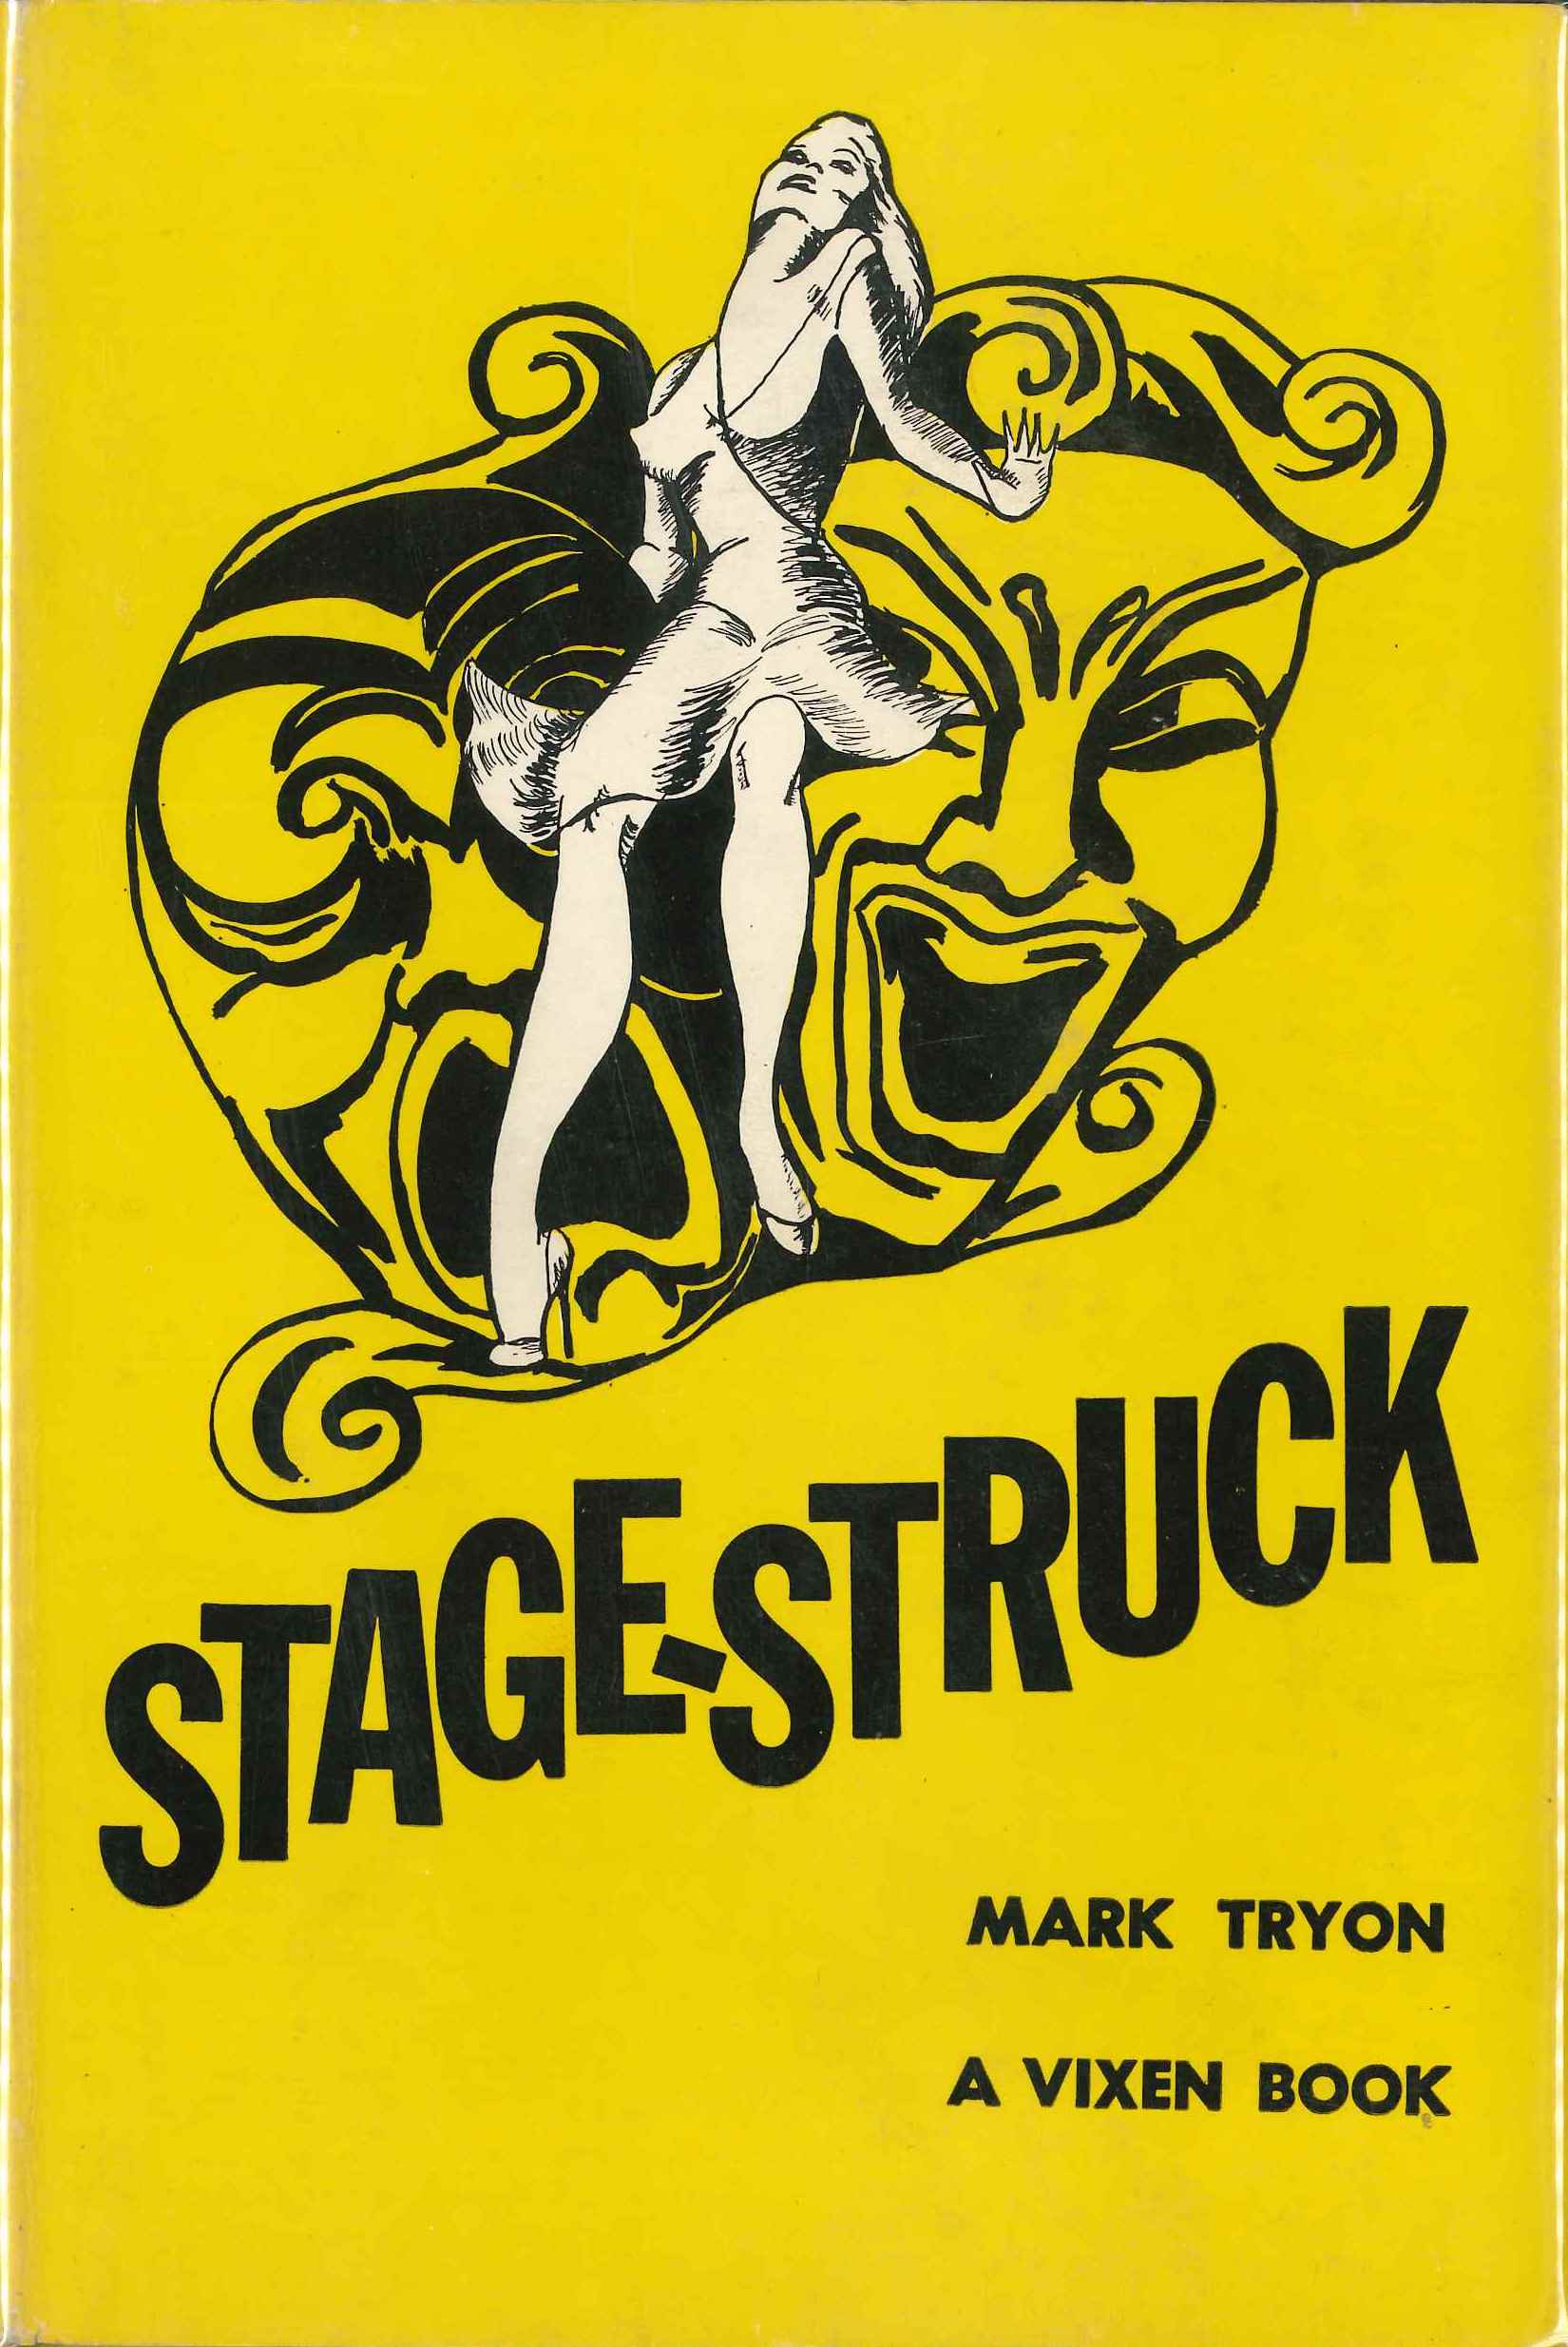 Mark Tryon, Stage-Struck, 1949, dust jacket